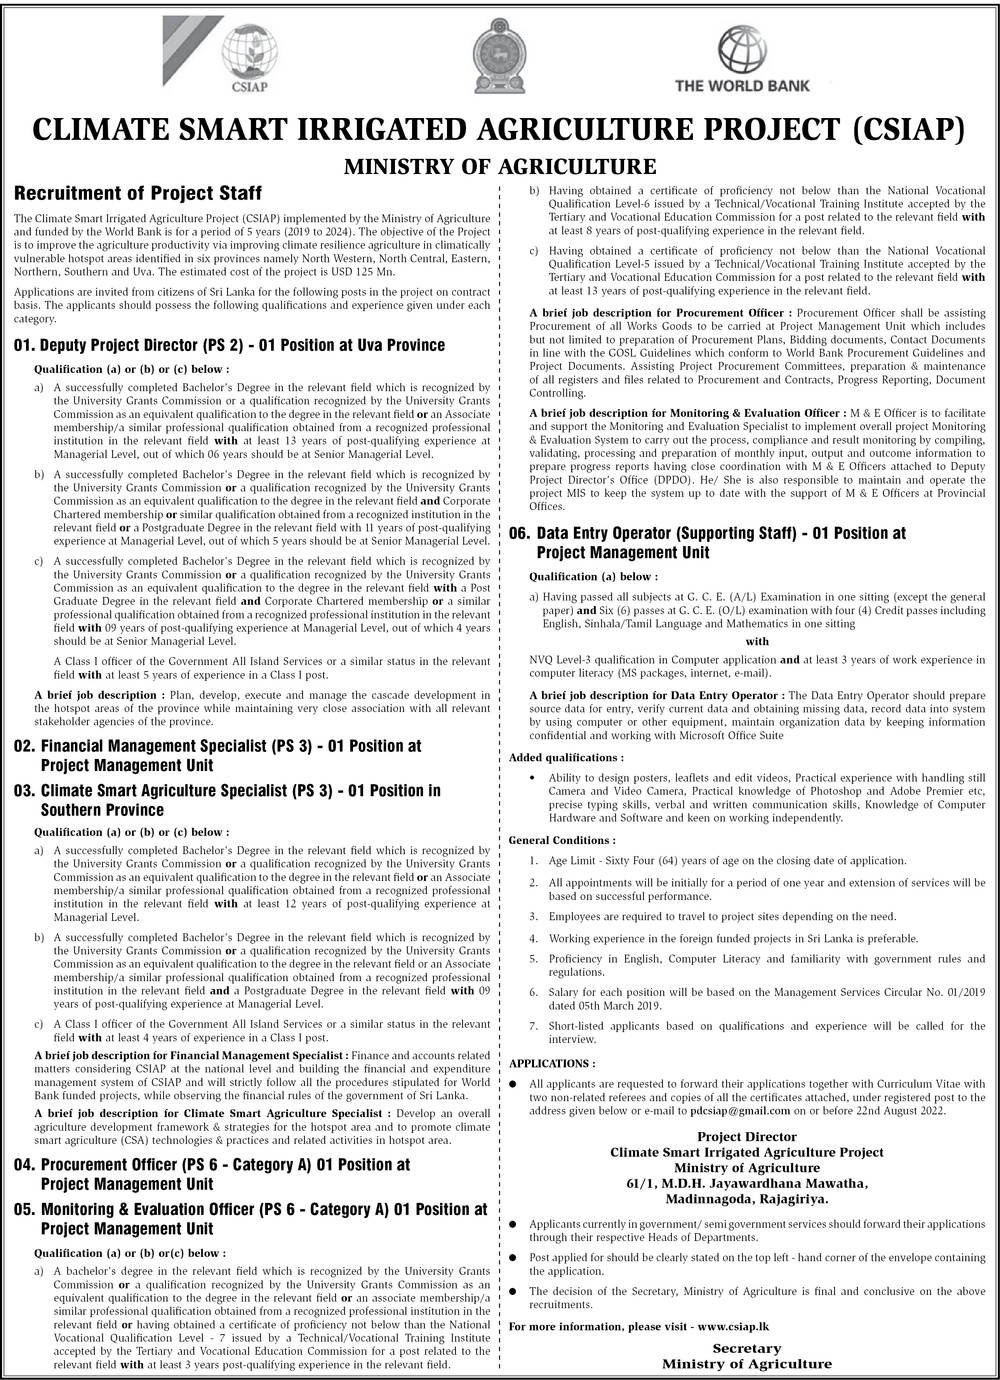 Deputy Project Director, Financial Management Specialist, Climate smart Agriculture specialist, procurement officer, monitoring and evaluation officer, data entry operator - Ministry of agriculture